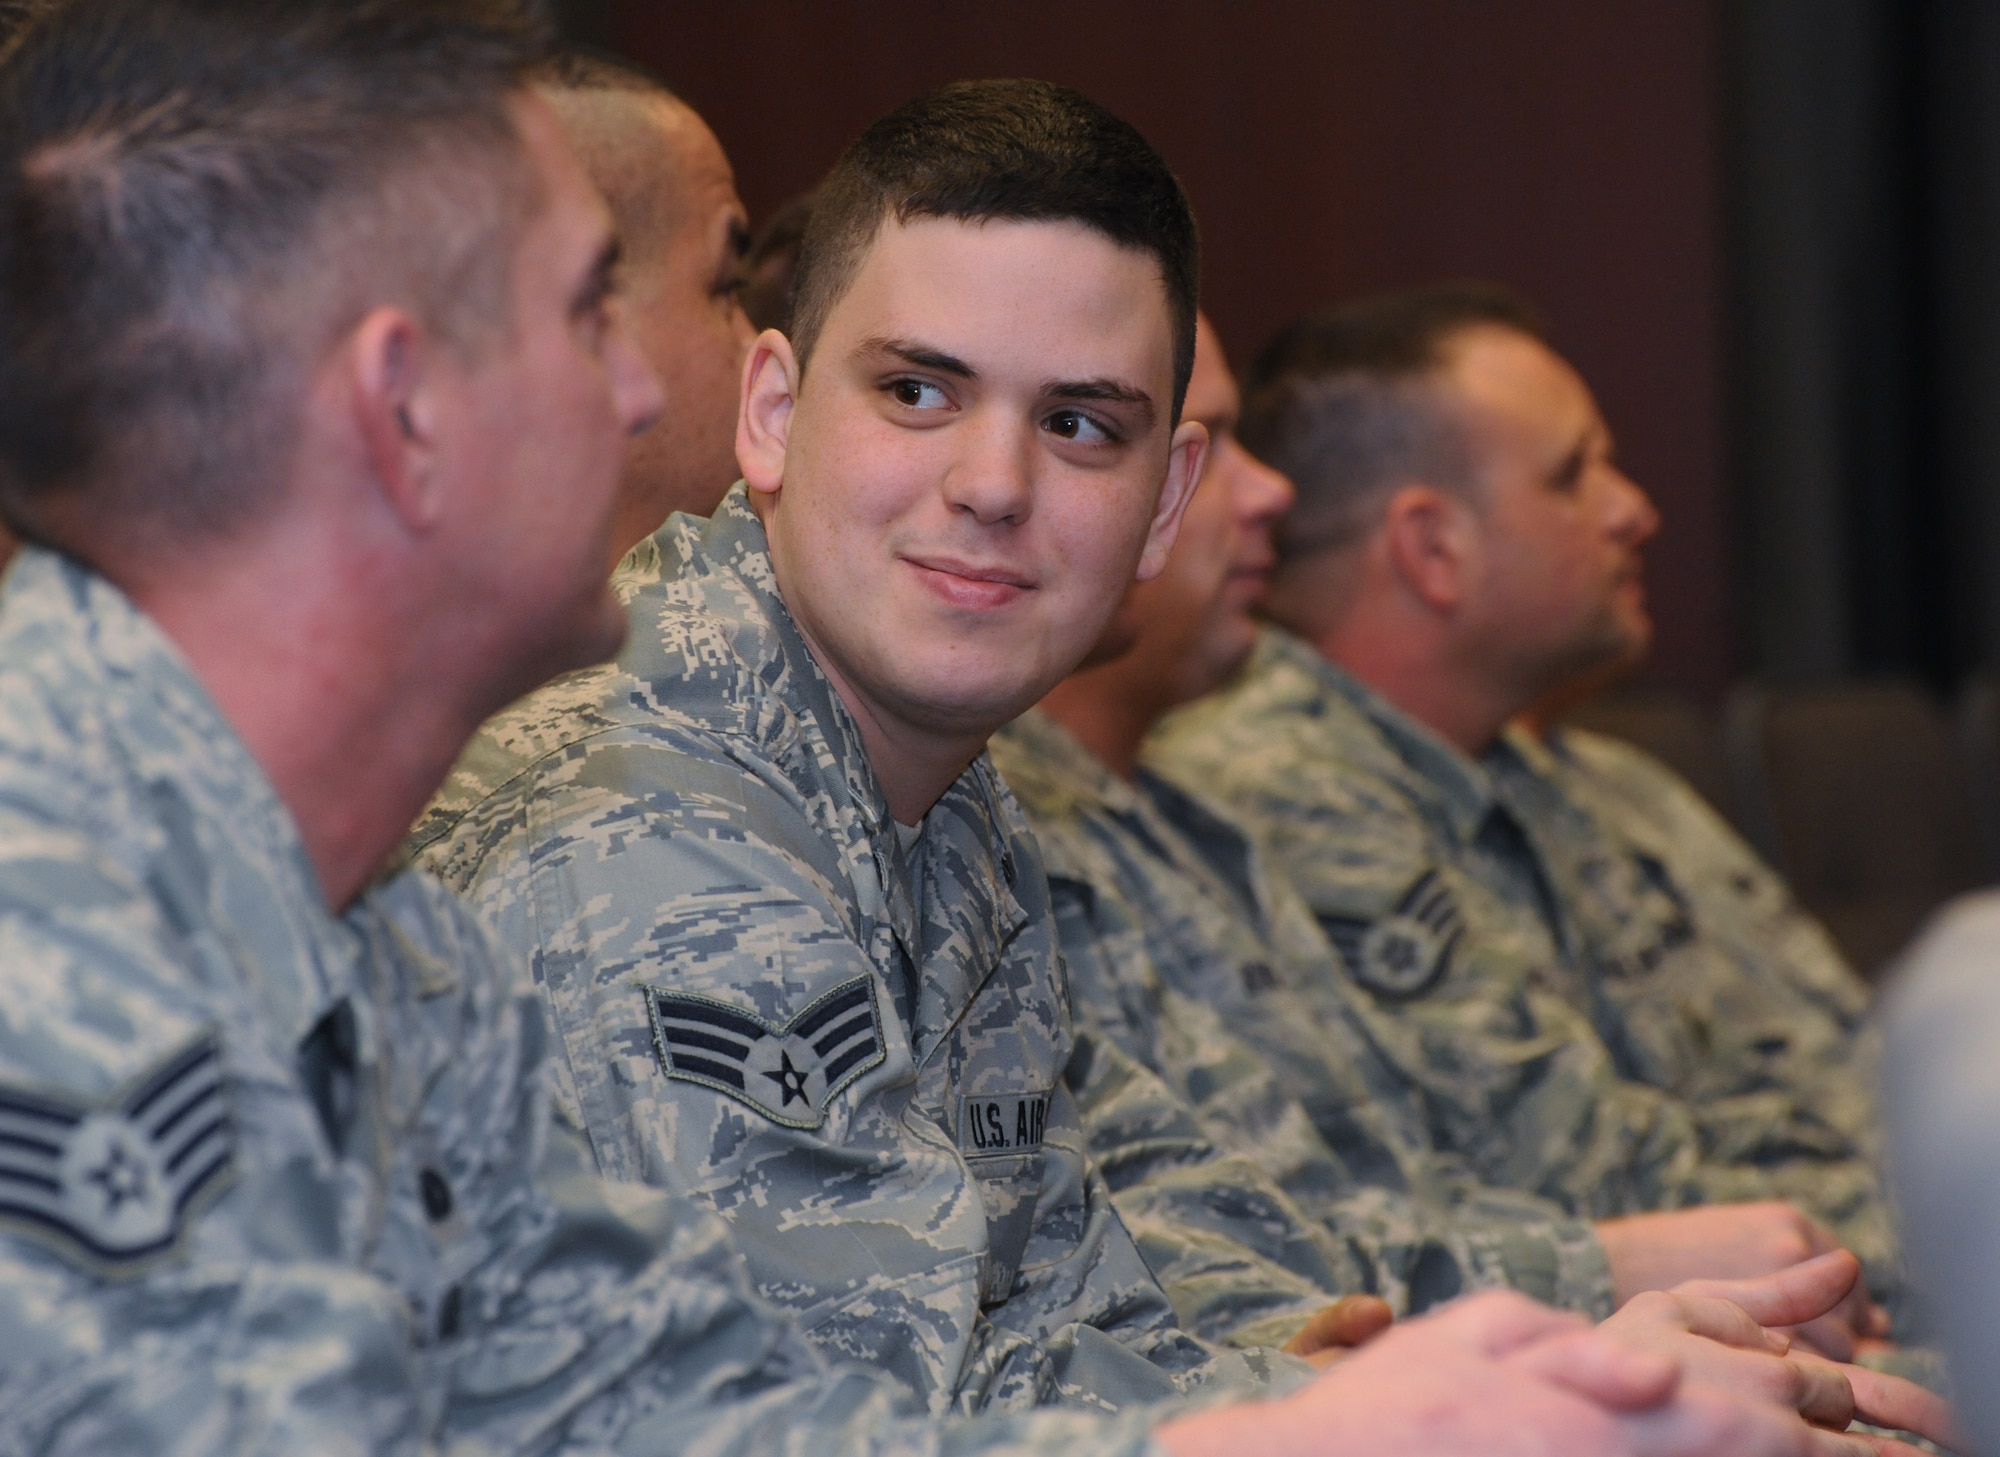 Oregon Air National Guard Senior Airman James A. Kalmbach, 142nd Fighter Wing Security Forces Squadron, relaxes for a few moments with some of his fellow airmen, prior to the mobilization ceremony for the 142nd Fighter Wing Security Forces Squadron at Camp Withycombe, Ore., Dec. 11, 2012. (U.S. Air Force photograph by Tech. Sgt. John Hughel, 142nd Fighter Wing Public Affairs/Released)